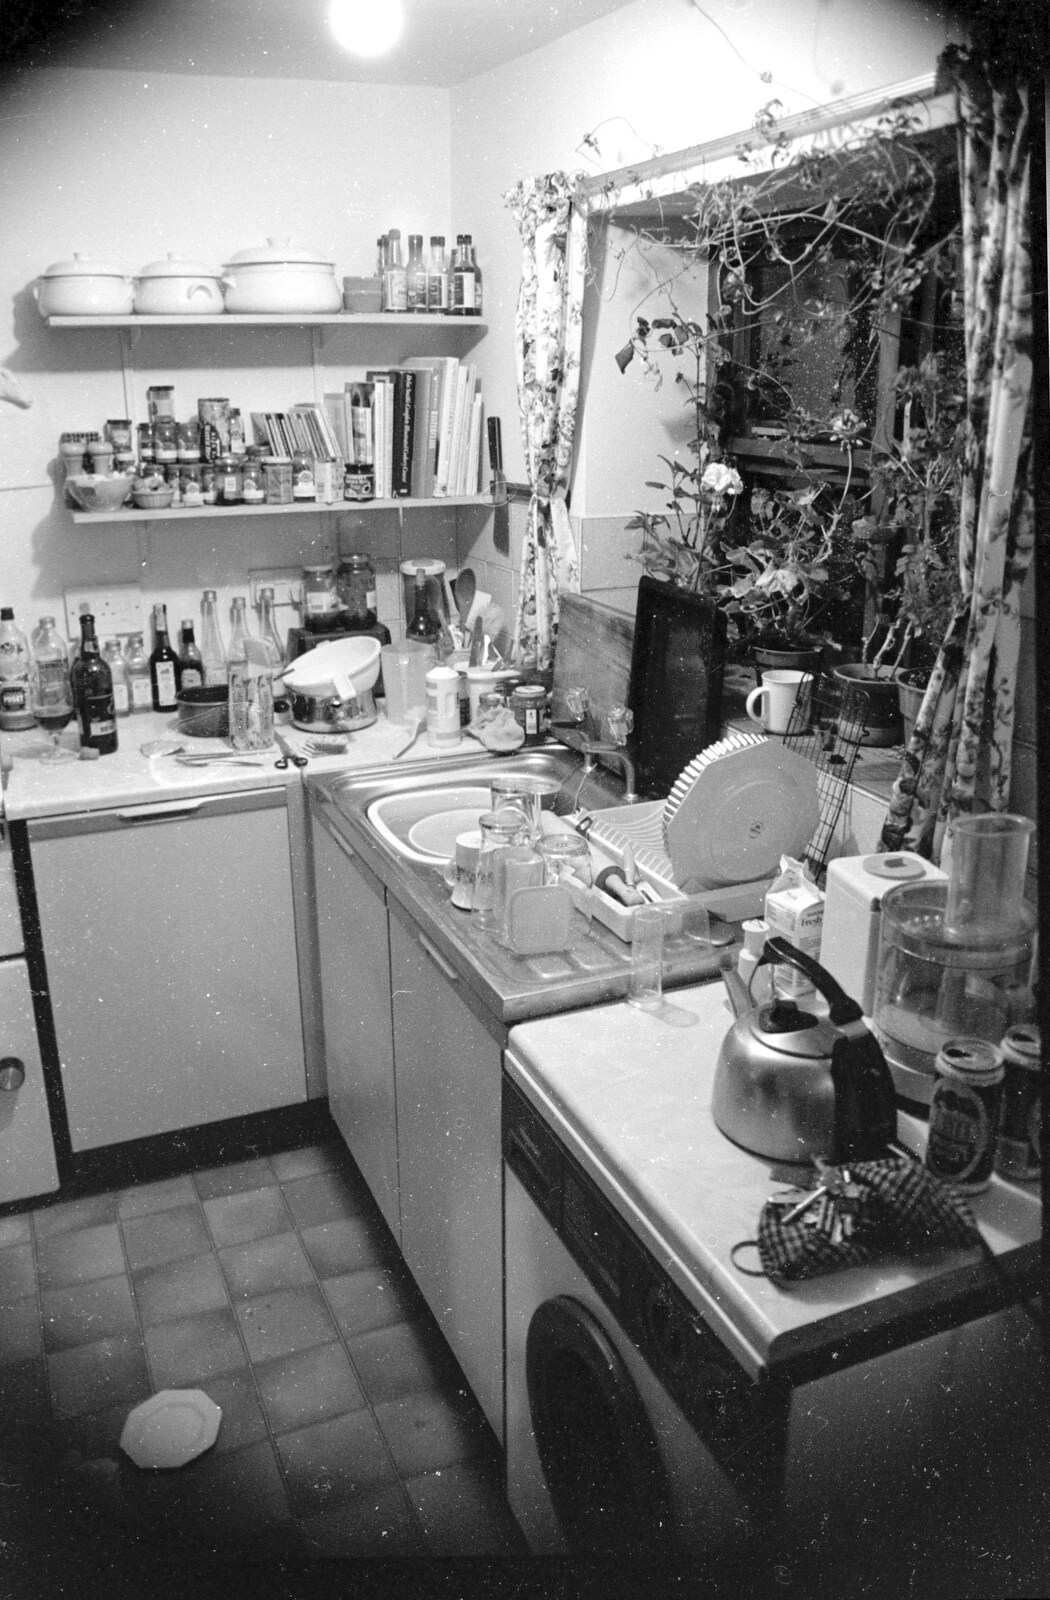 The kitchen of The Stables in Stuston from Nosher Leaves BPCC Business Magazines, Colchester, Essex - 18th July 1991